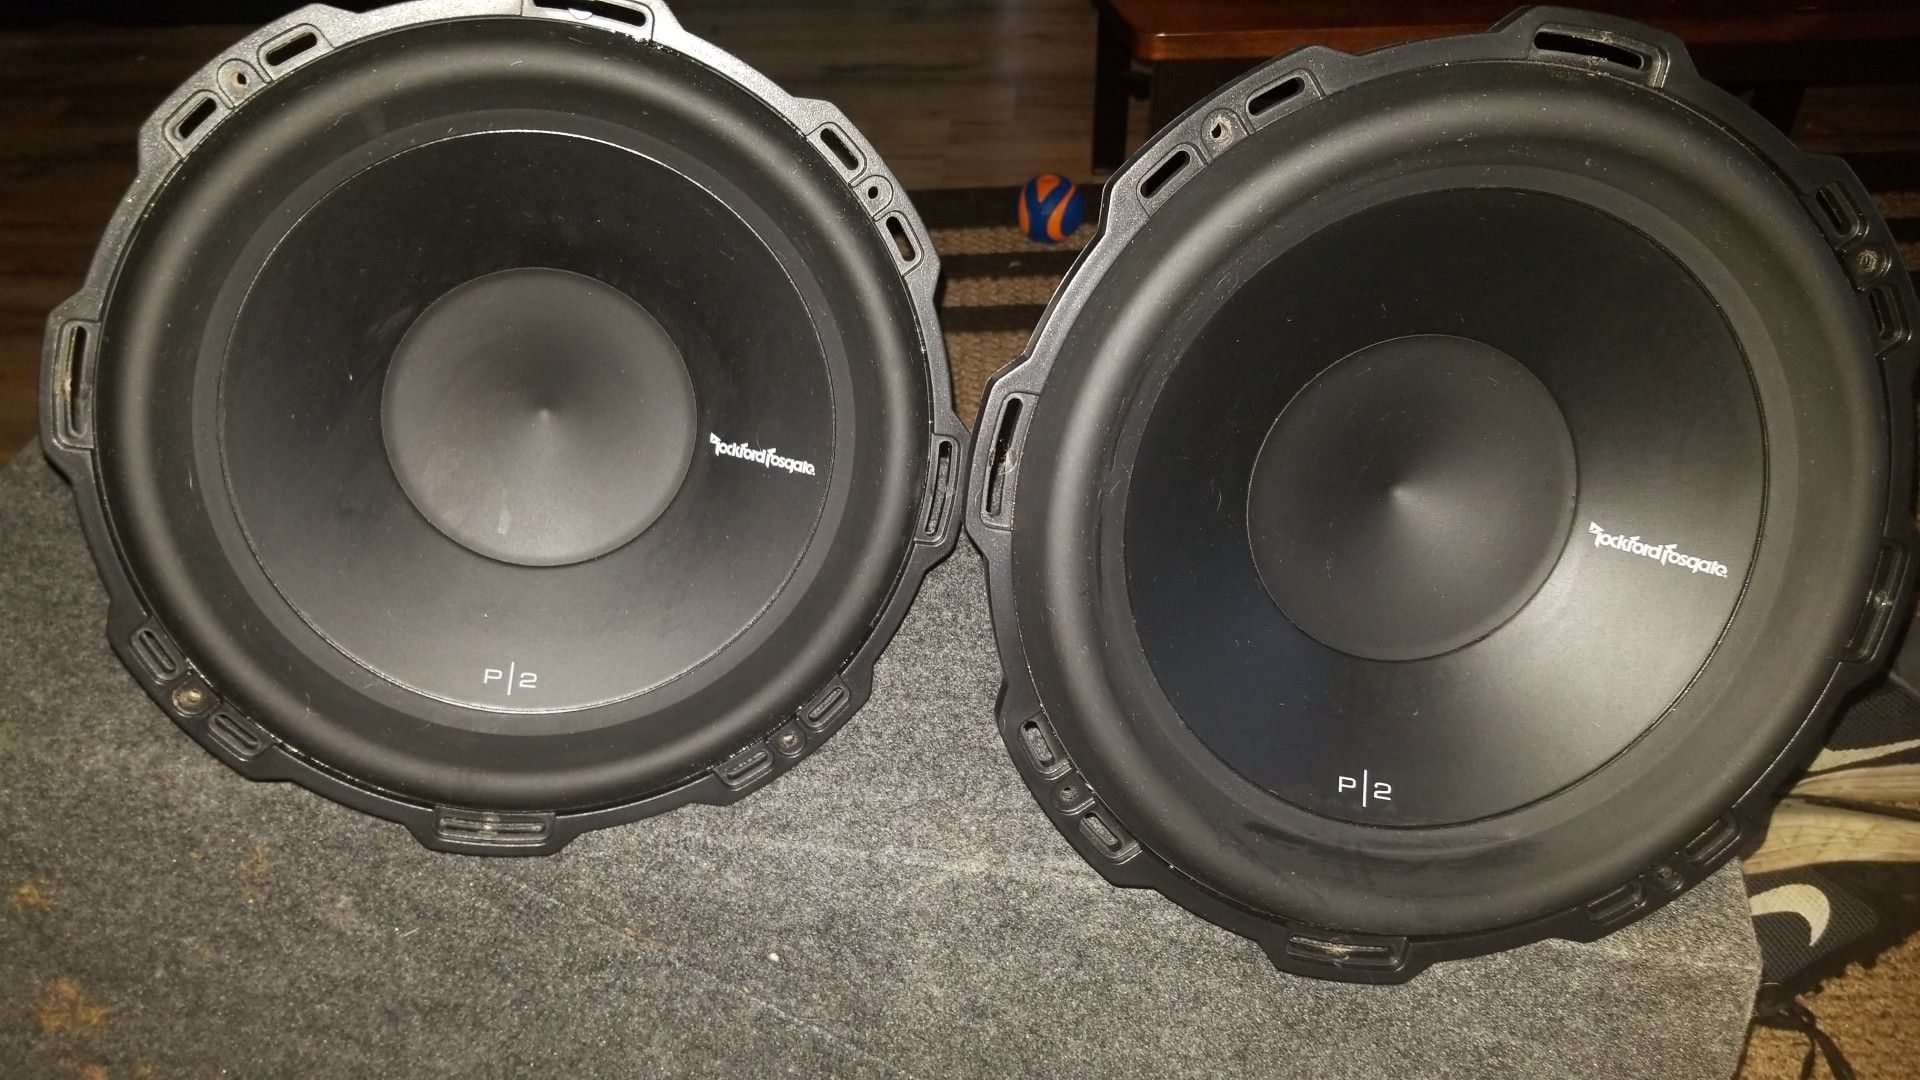 Rockford Fosgate Punch P2 12in subs. Sold as a pair, not individual